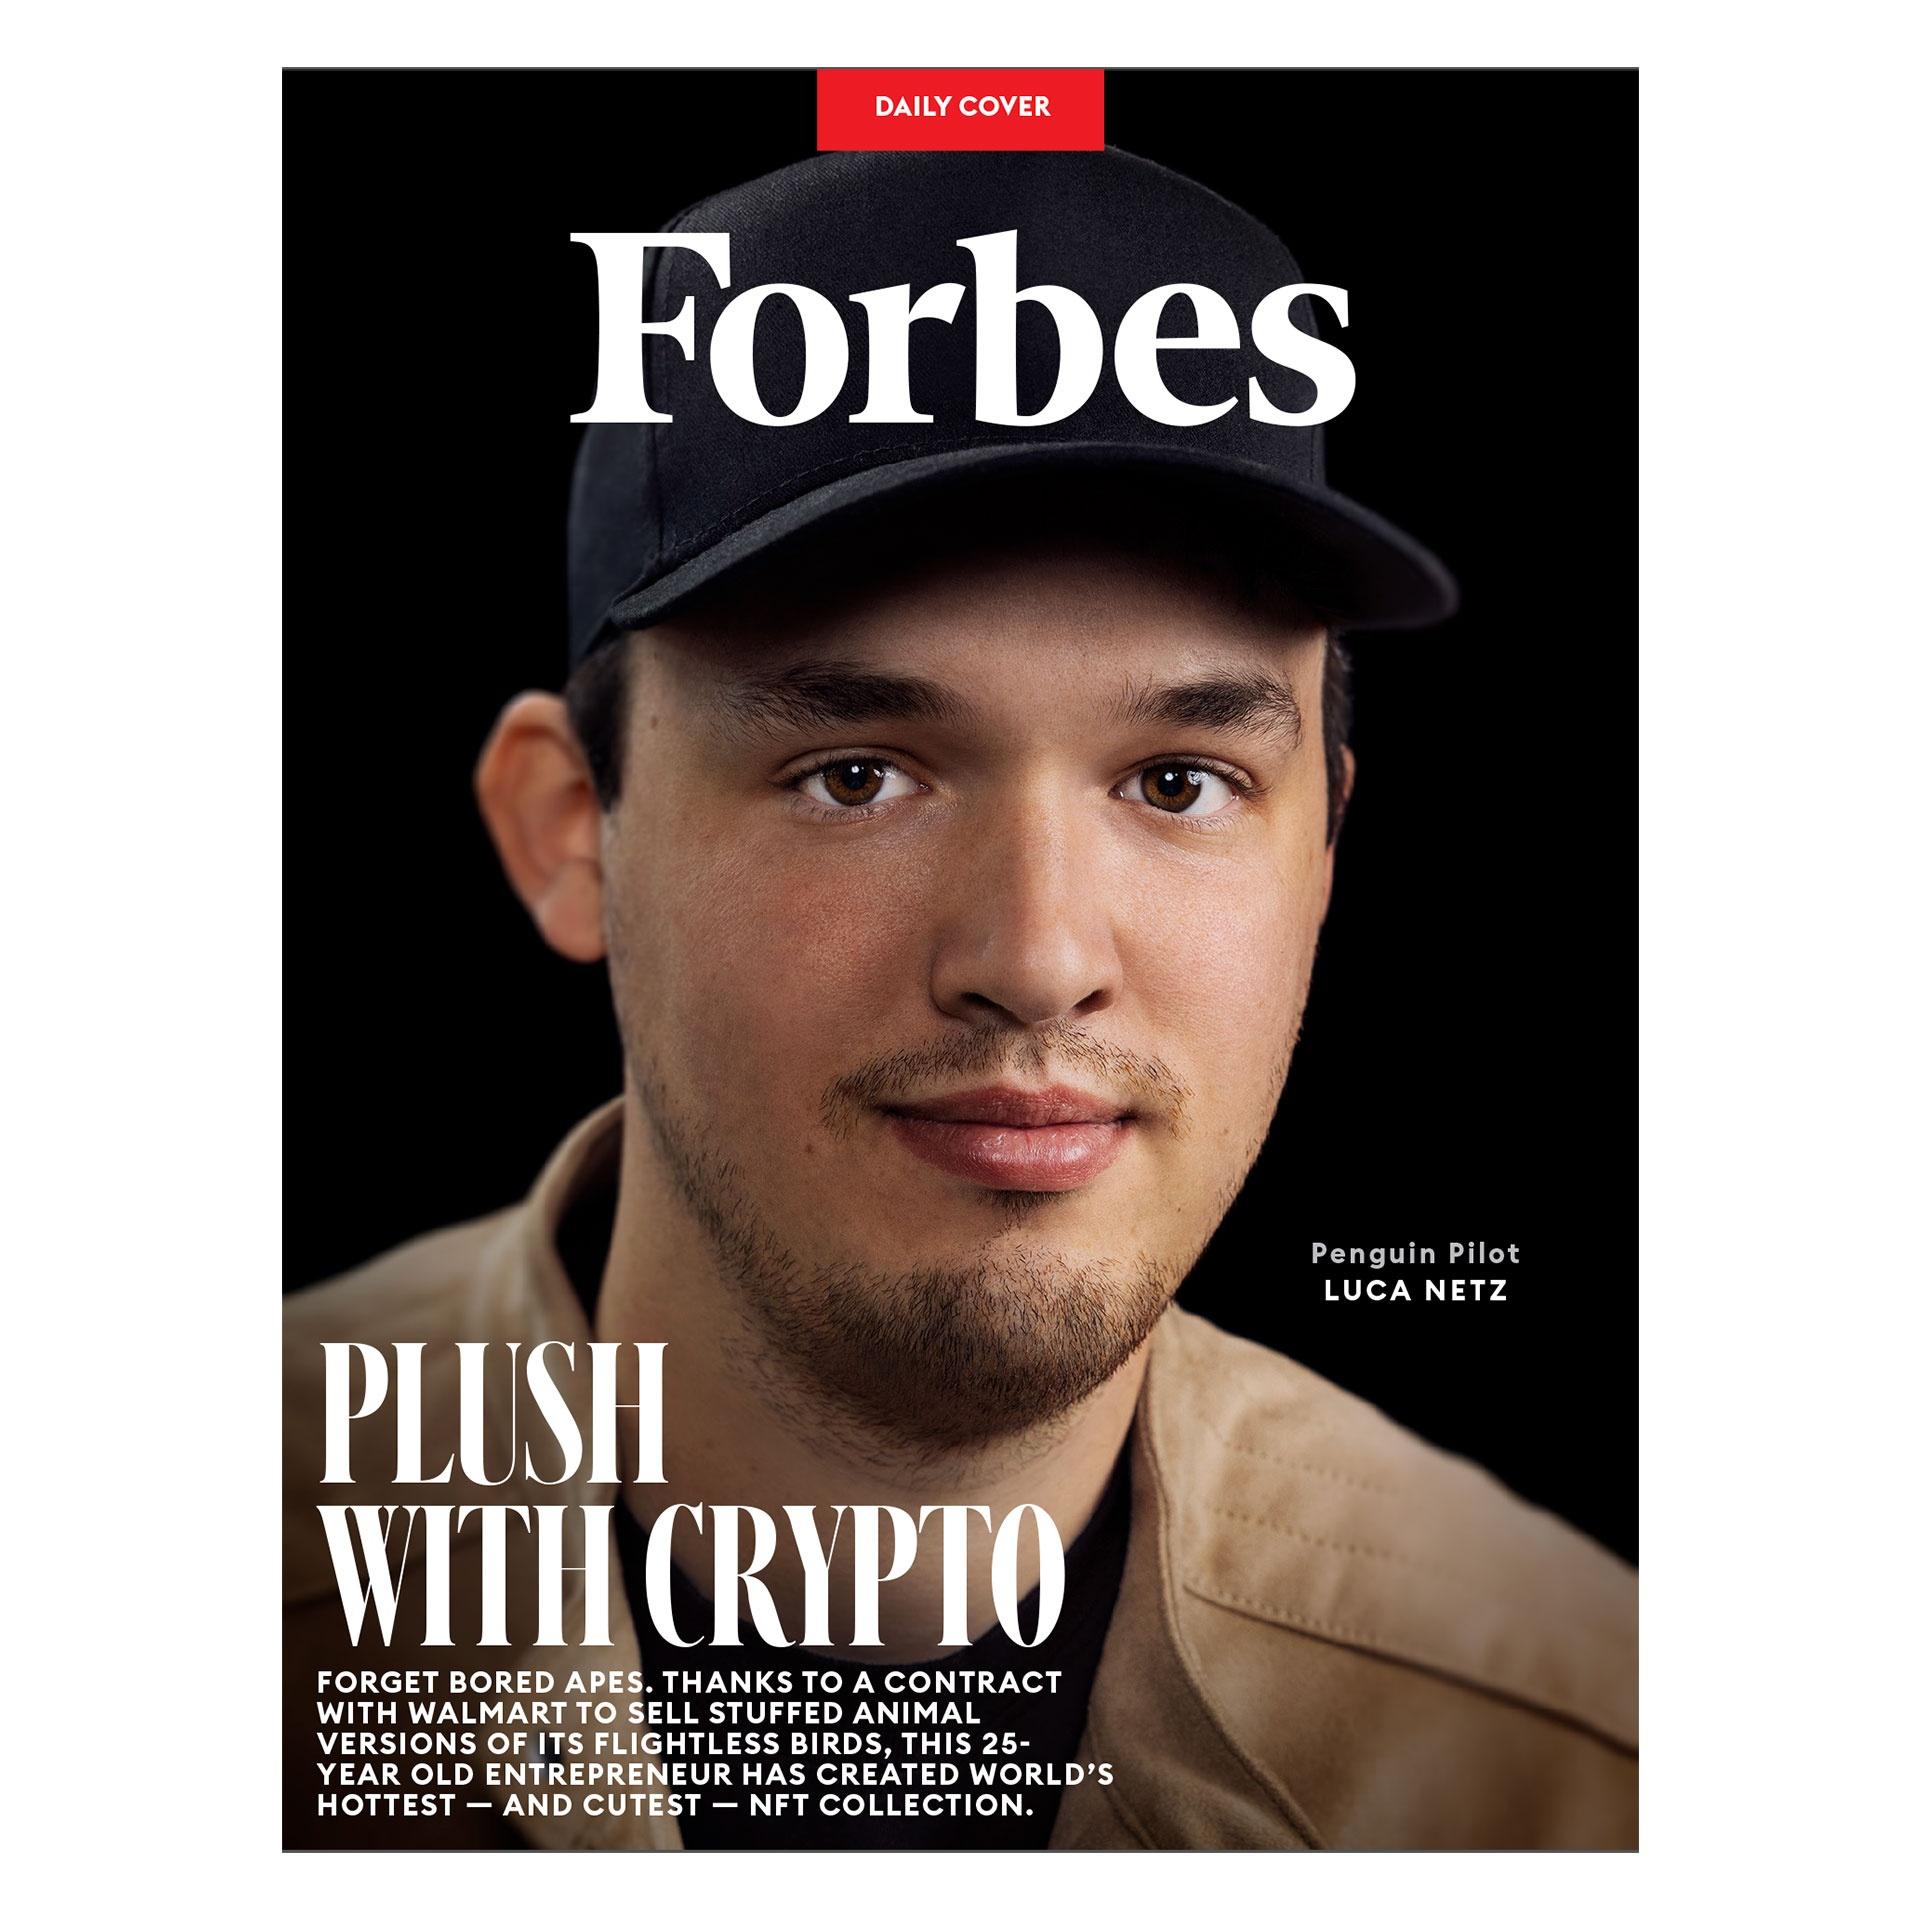 daily-cover-1x1-Luca Schnetzler-photo by Mary Beth Koeth for Forbes